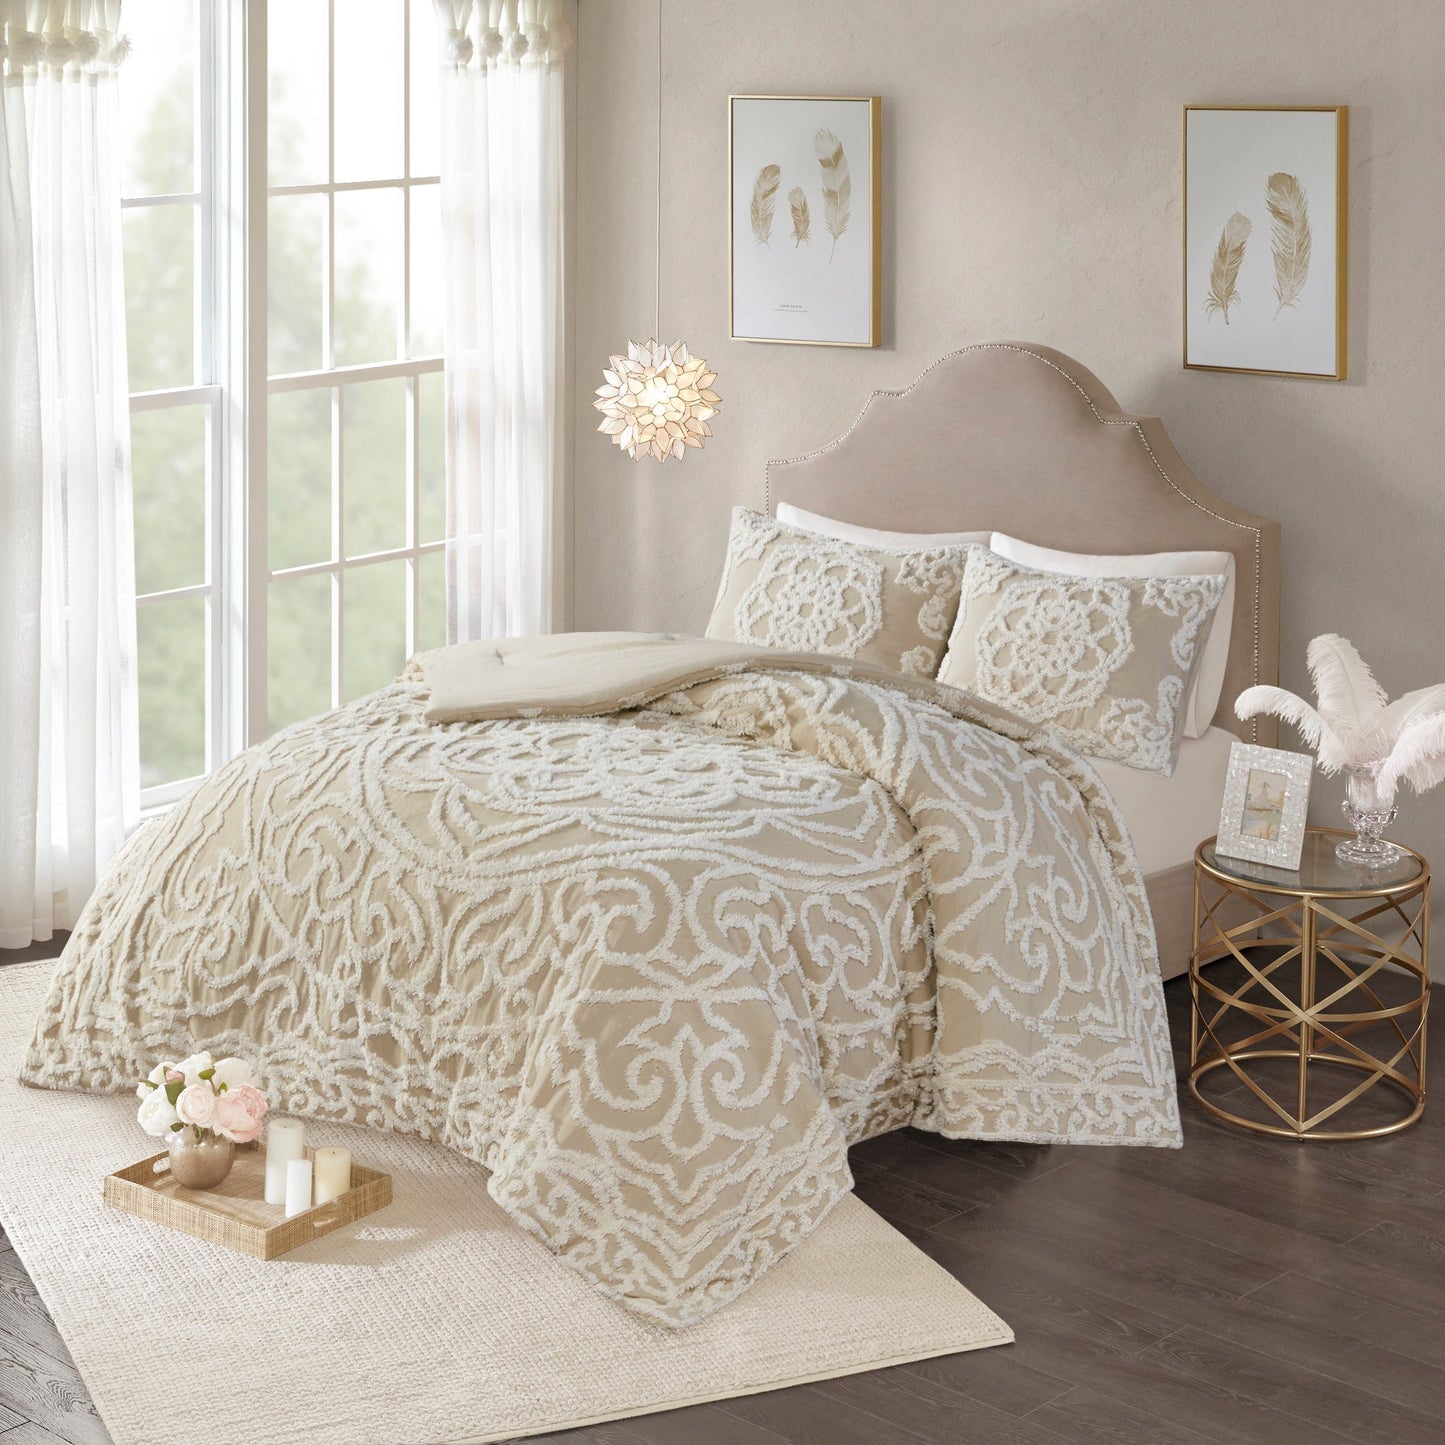 Cecily Tufted Cotton Chenille Medallion Duvet Cover Set Taupe